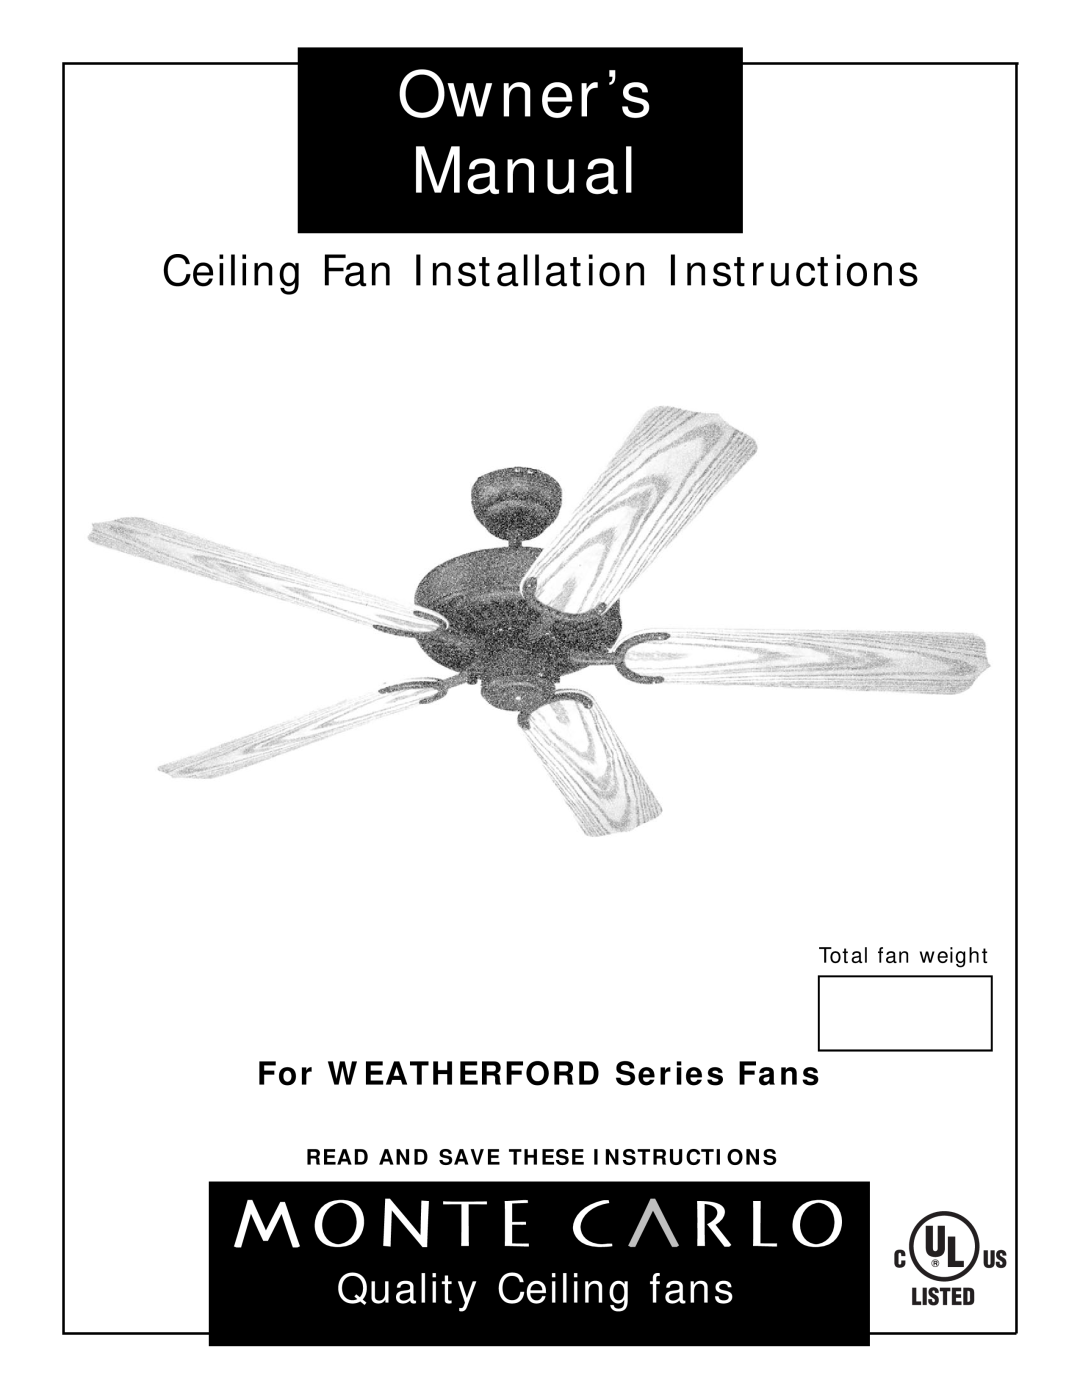 Monte Carlo Fan Company Ceiling Fans owner manual For WEATHERFORD Series Fans, Total fan weight, Quality Ceiling fans 